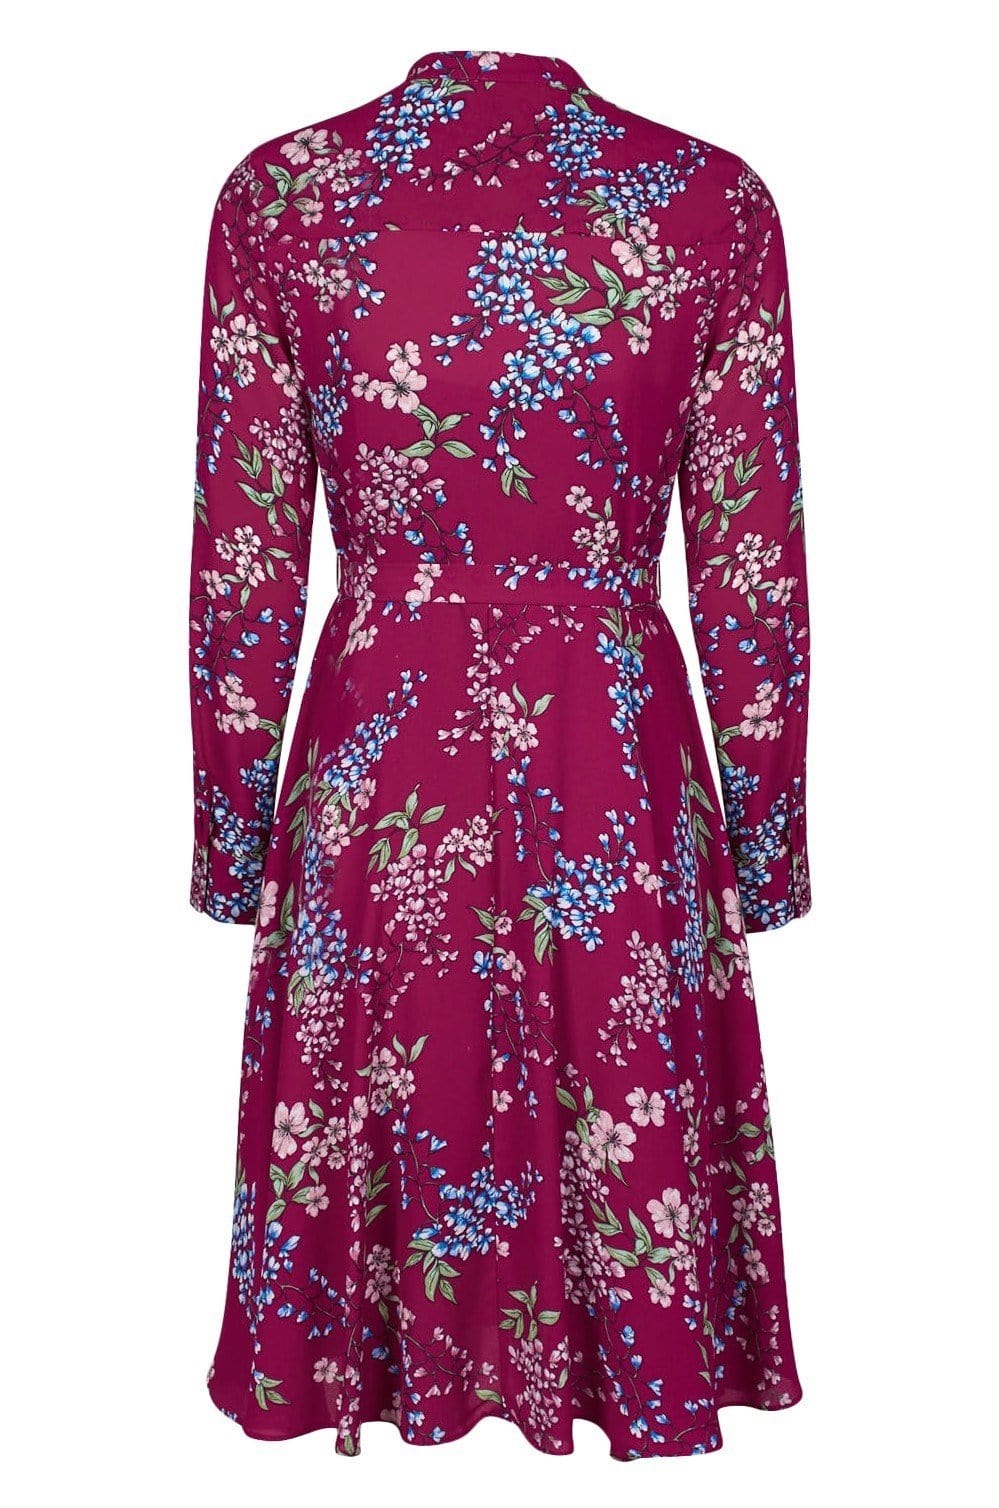 Nanette Nanette Lepore - NM9S171Y9 Long Sleeve Floral Print Dress in Pink and Multi-Color